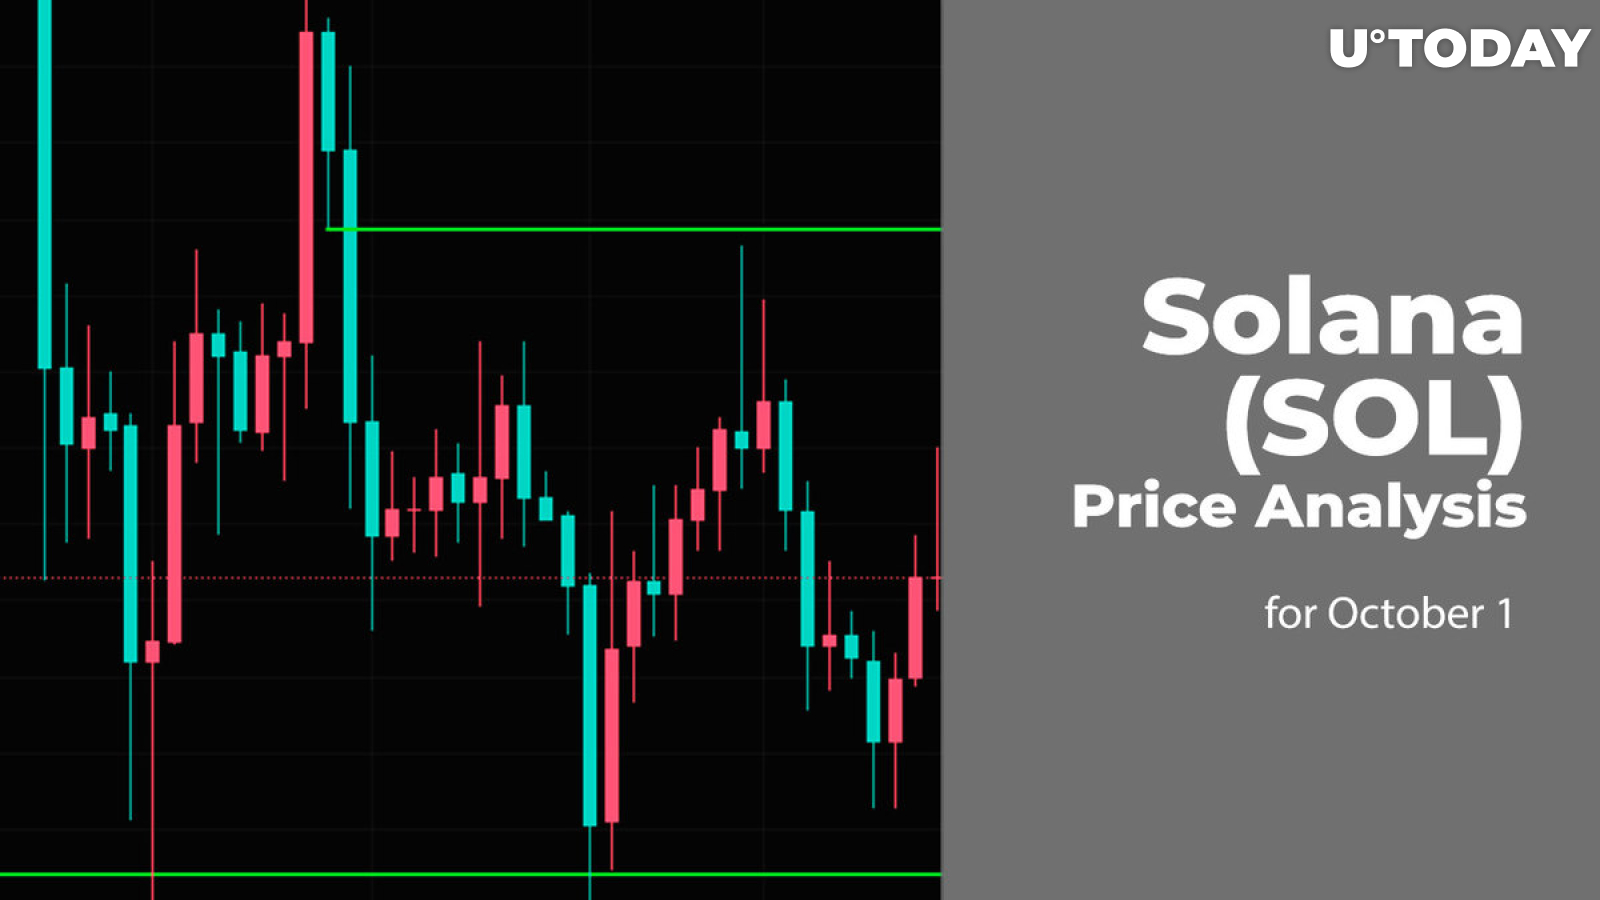 Solana (SOL) Price Analysis for October 1